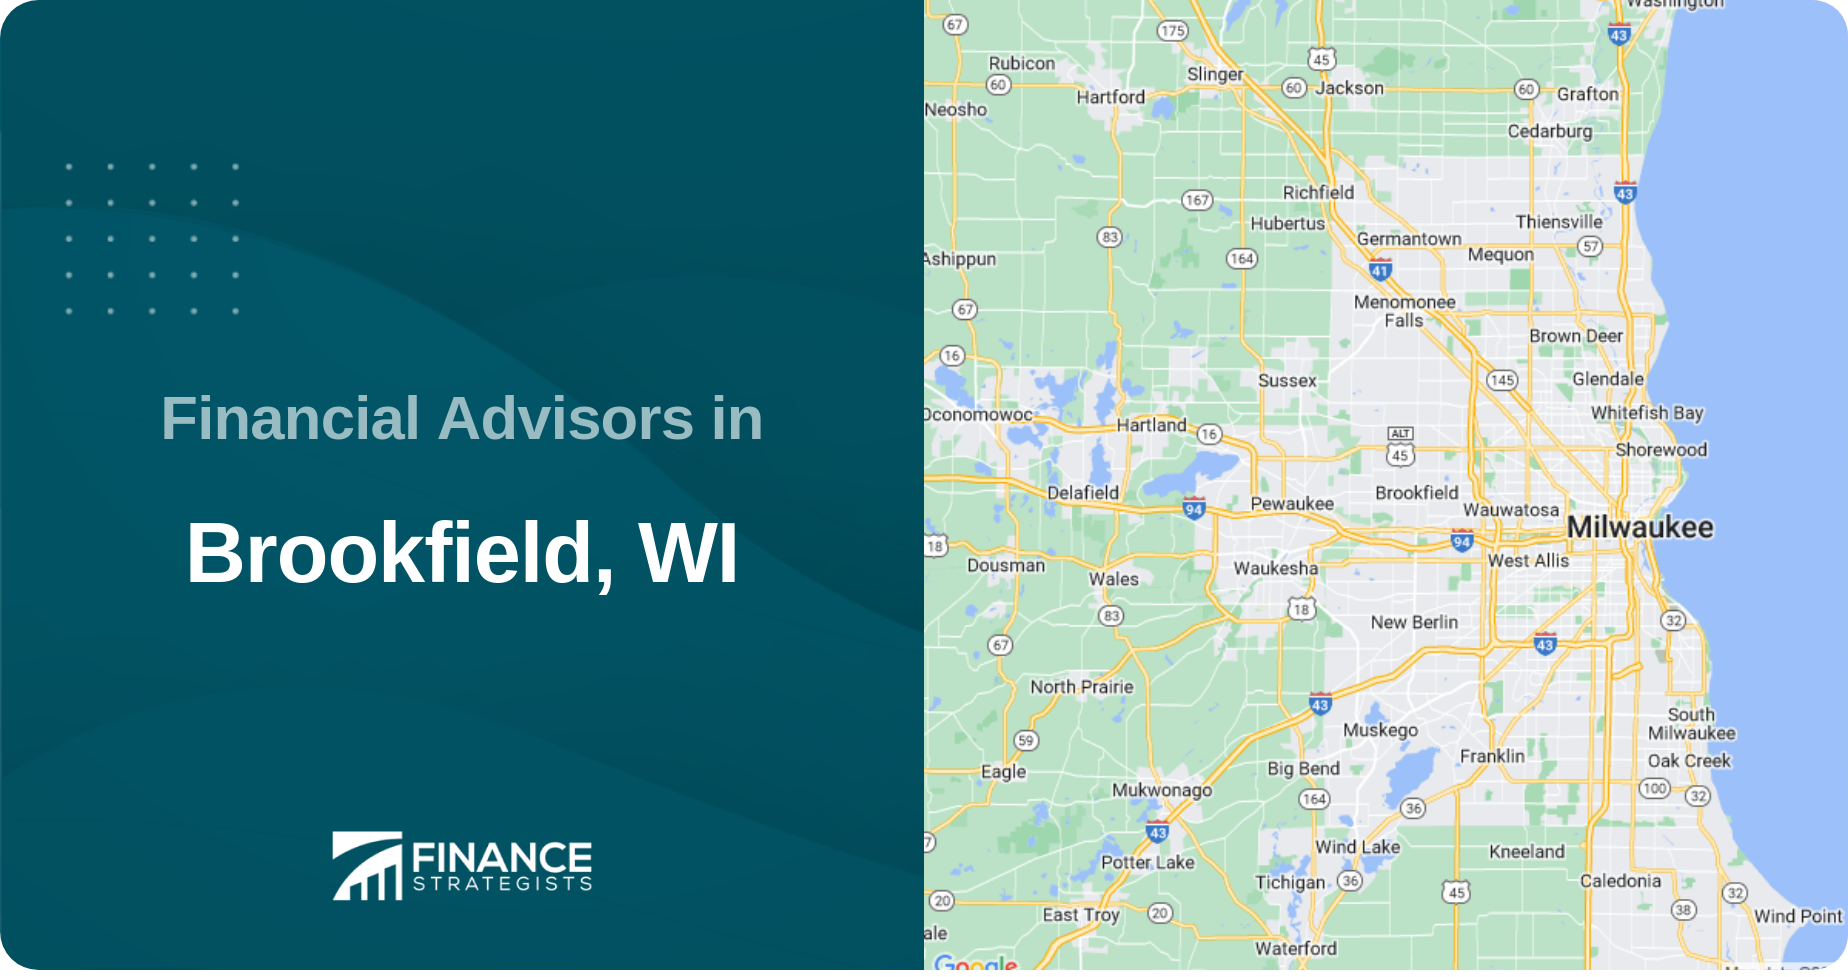 Financial Advisors in Brookfield, WI